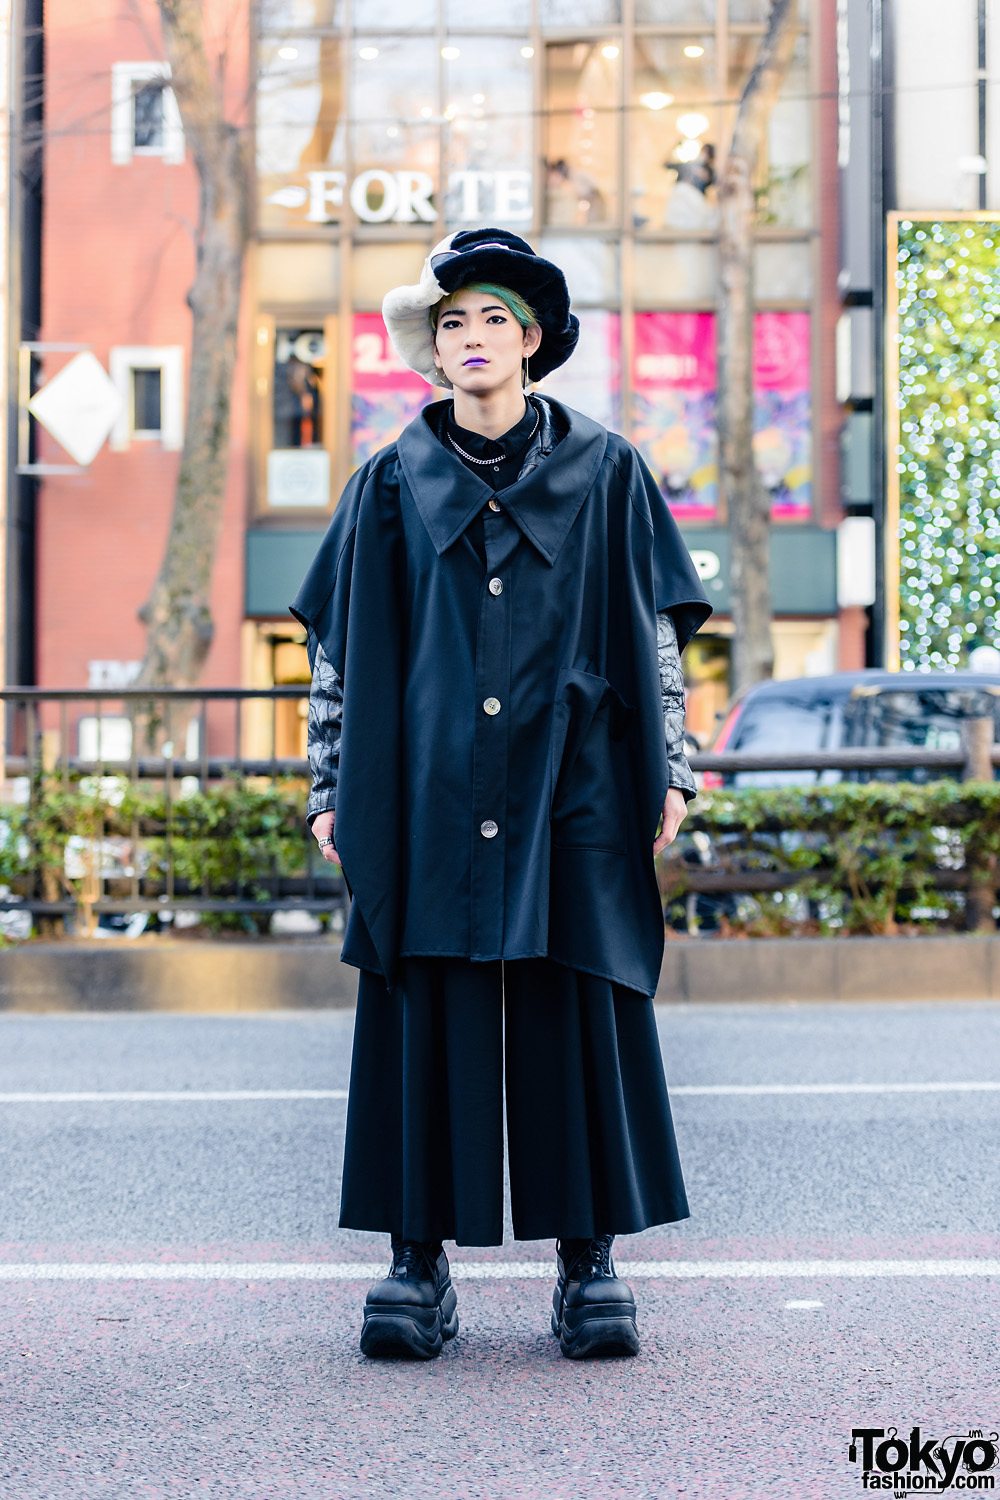 All Black Harajuku Street Style w/ Furry Two-Tone Hat, Mismatched Earrings, Anrealage Cape Coat, LAD Musician Wide Leg Pants & Demonia Platforms